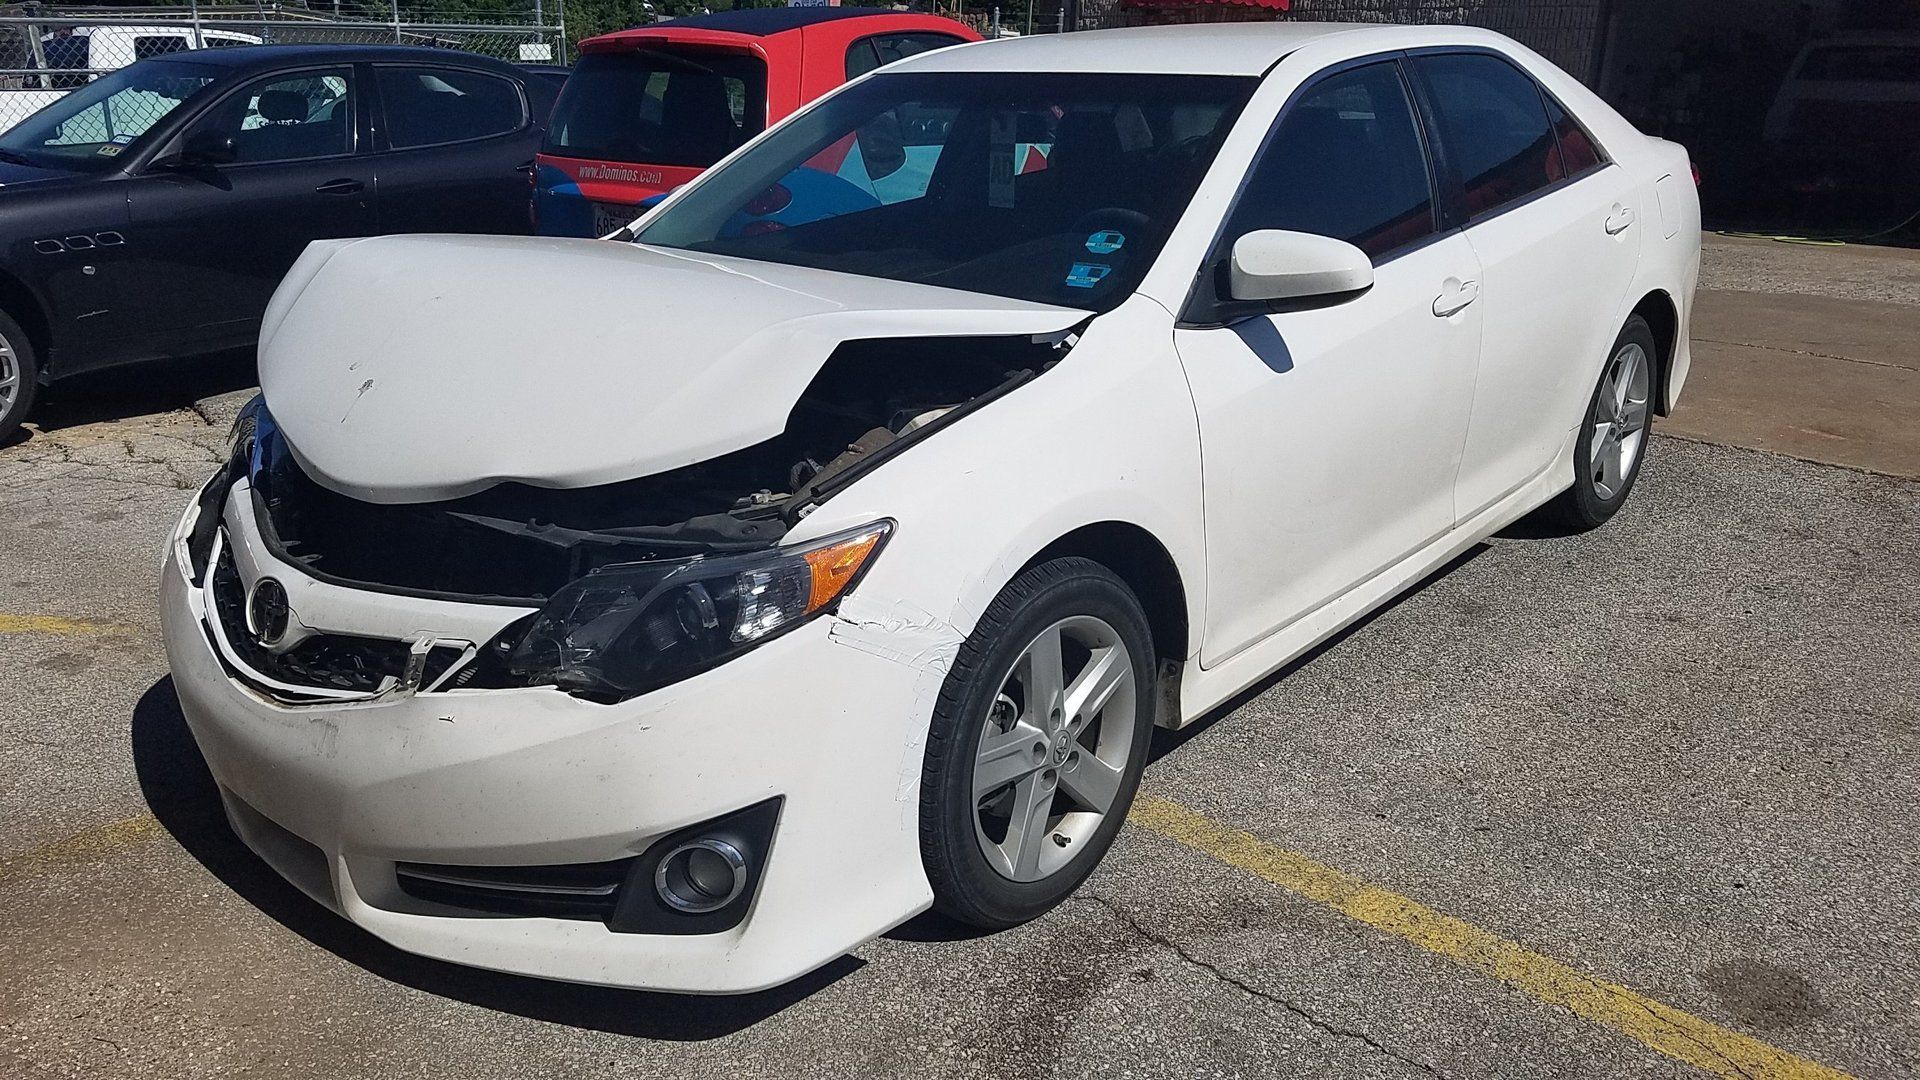 Full Service Collision Center - 2014+Camry03 1920w